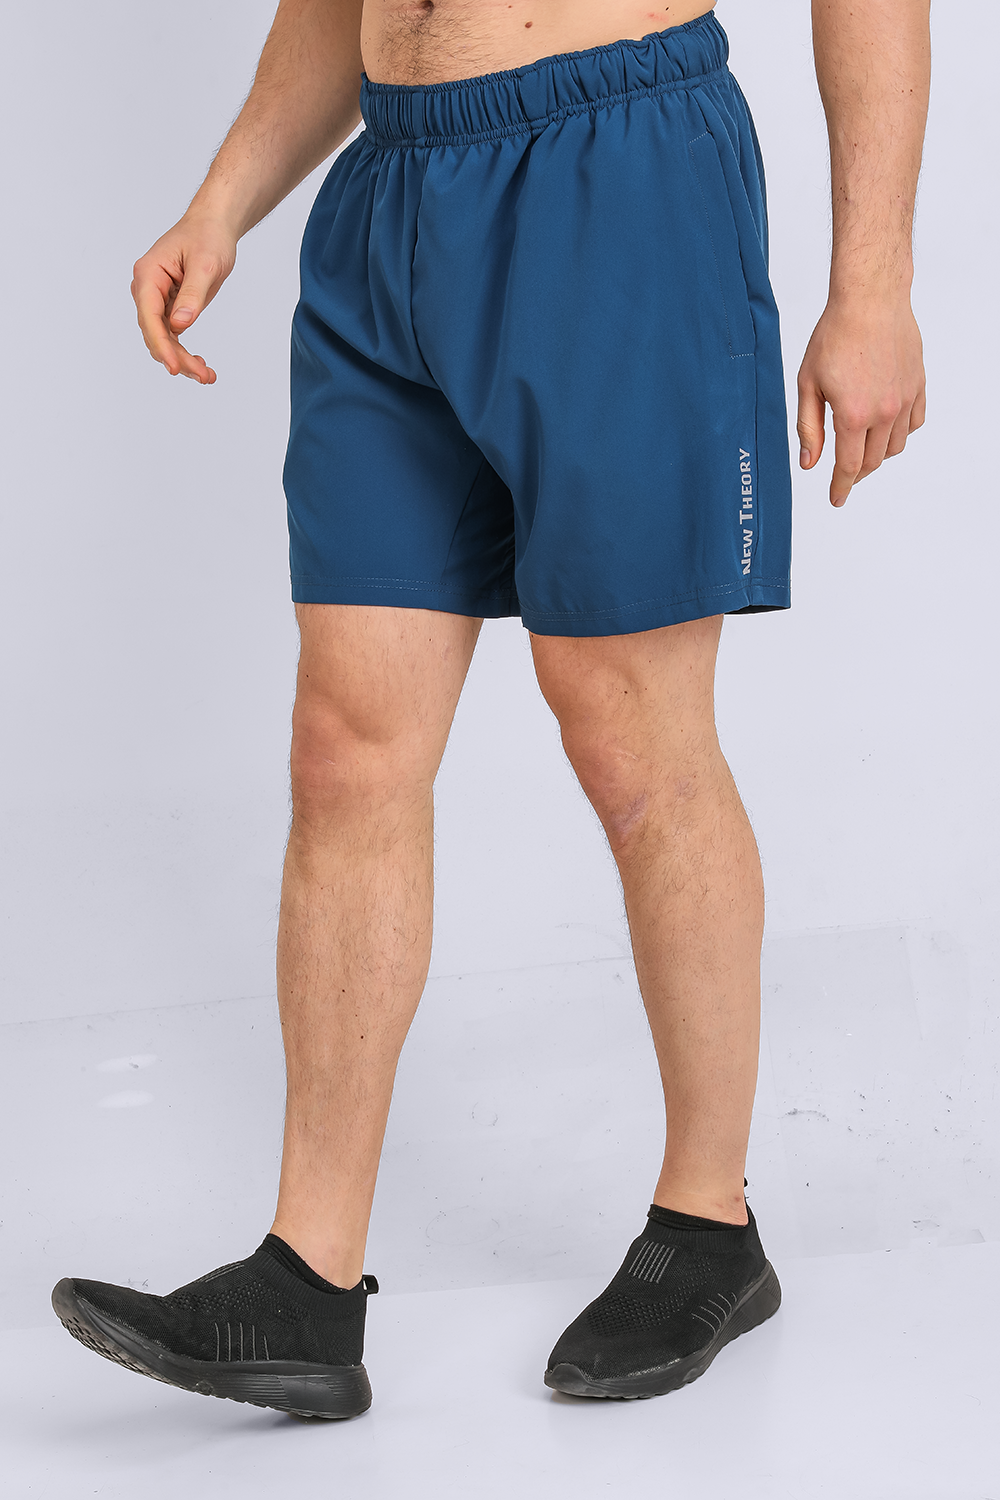 Dry-Fit Woven shorts- Teal